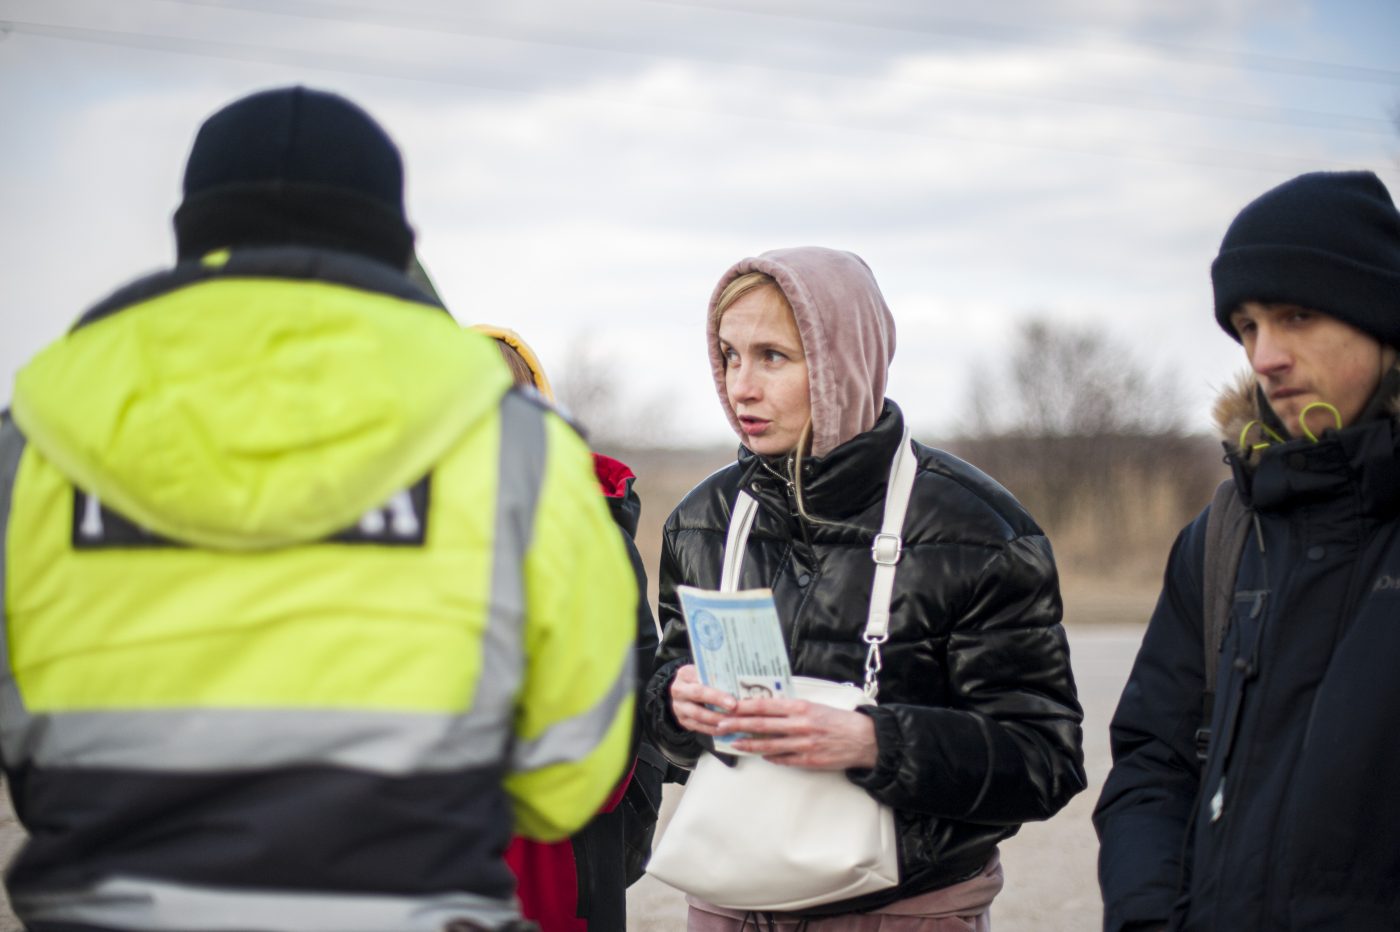 Photo: Ukrainian woman, escaped from the war, after crossing the border into Moldova, waiting to be transported to a reception centre. Palanca, territorial border between Moldova and Ukraine on 18 March, 2022. Credit: Photo by Andrea Mancini/NurPhoto